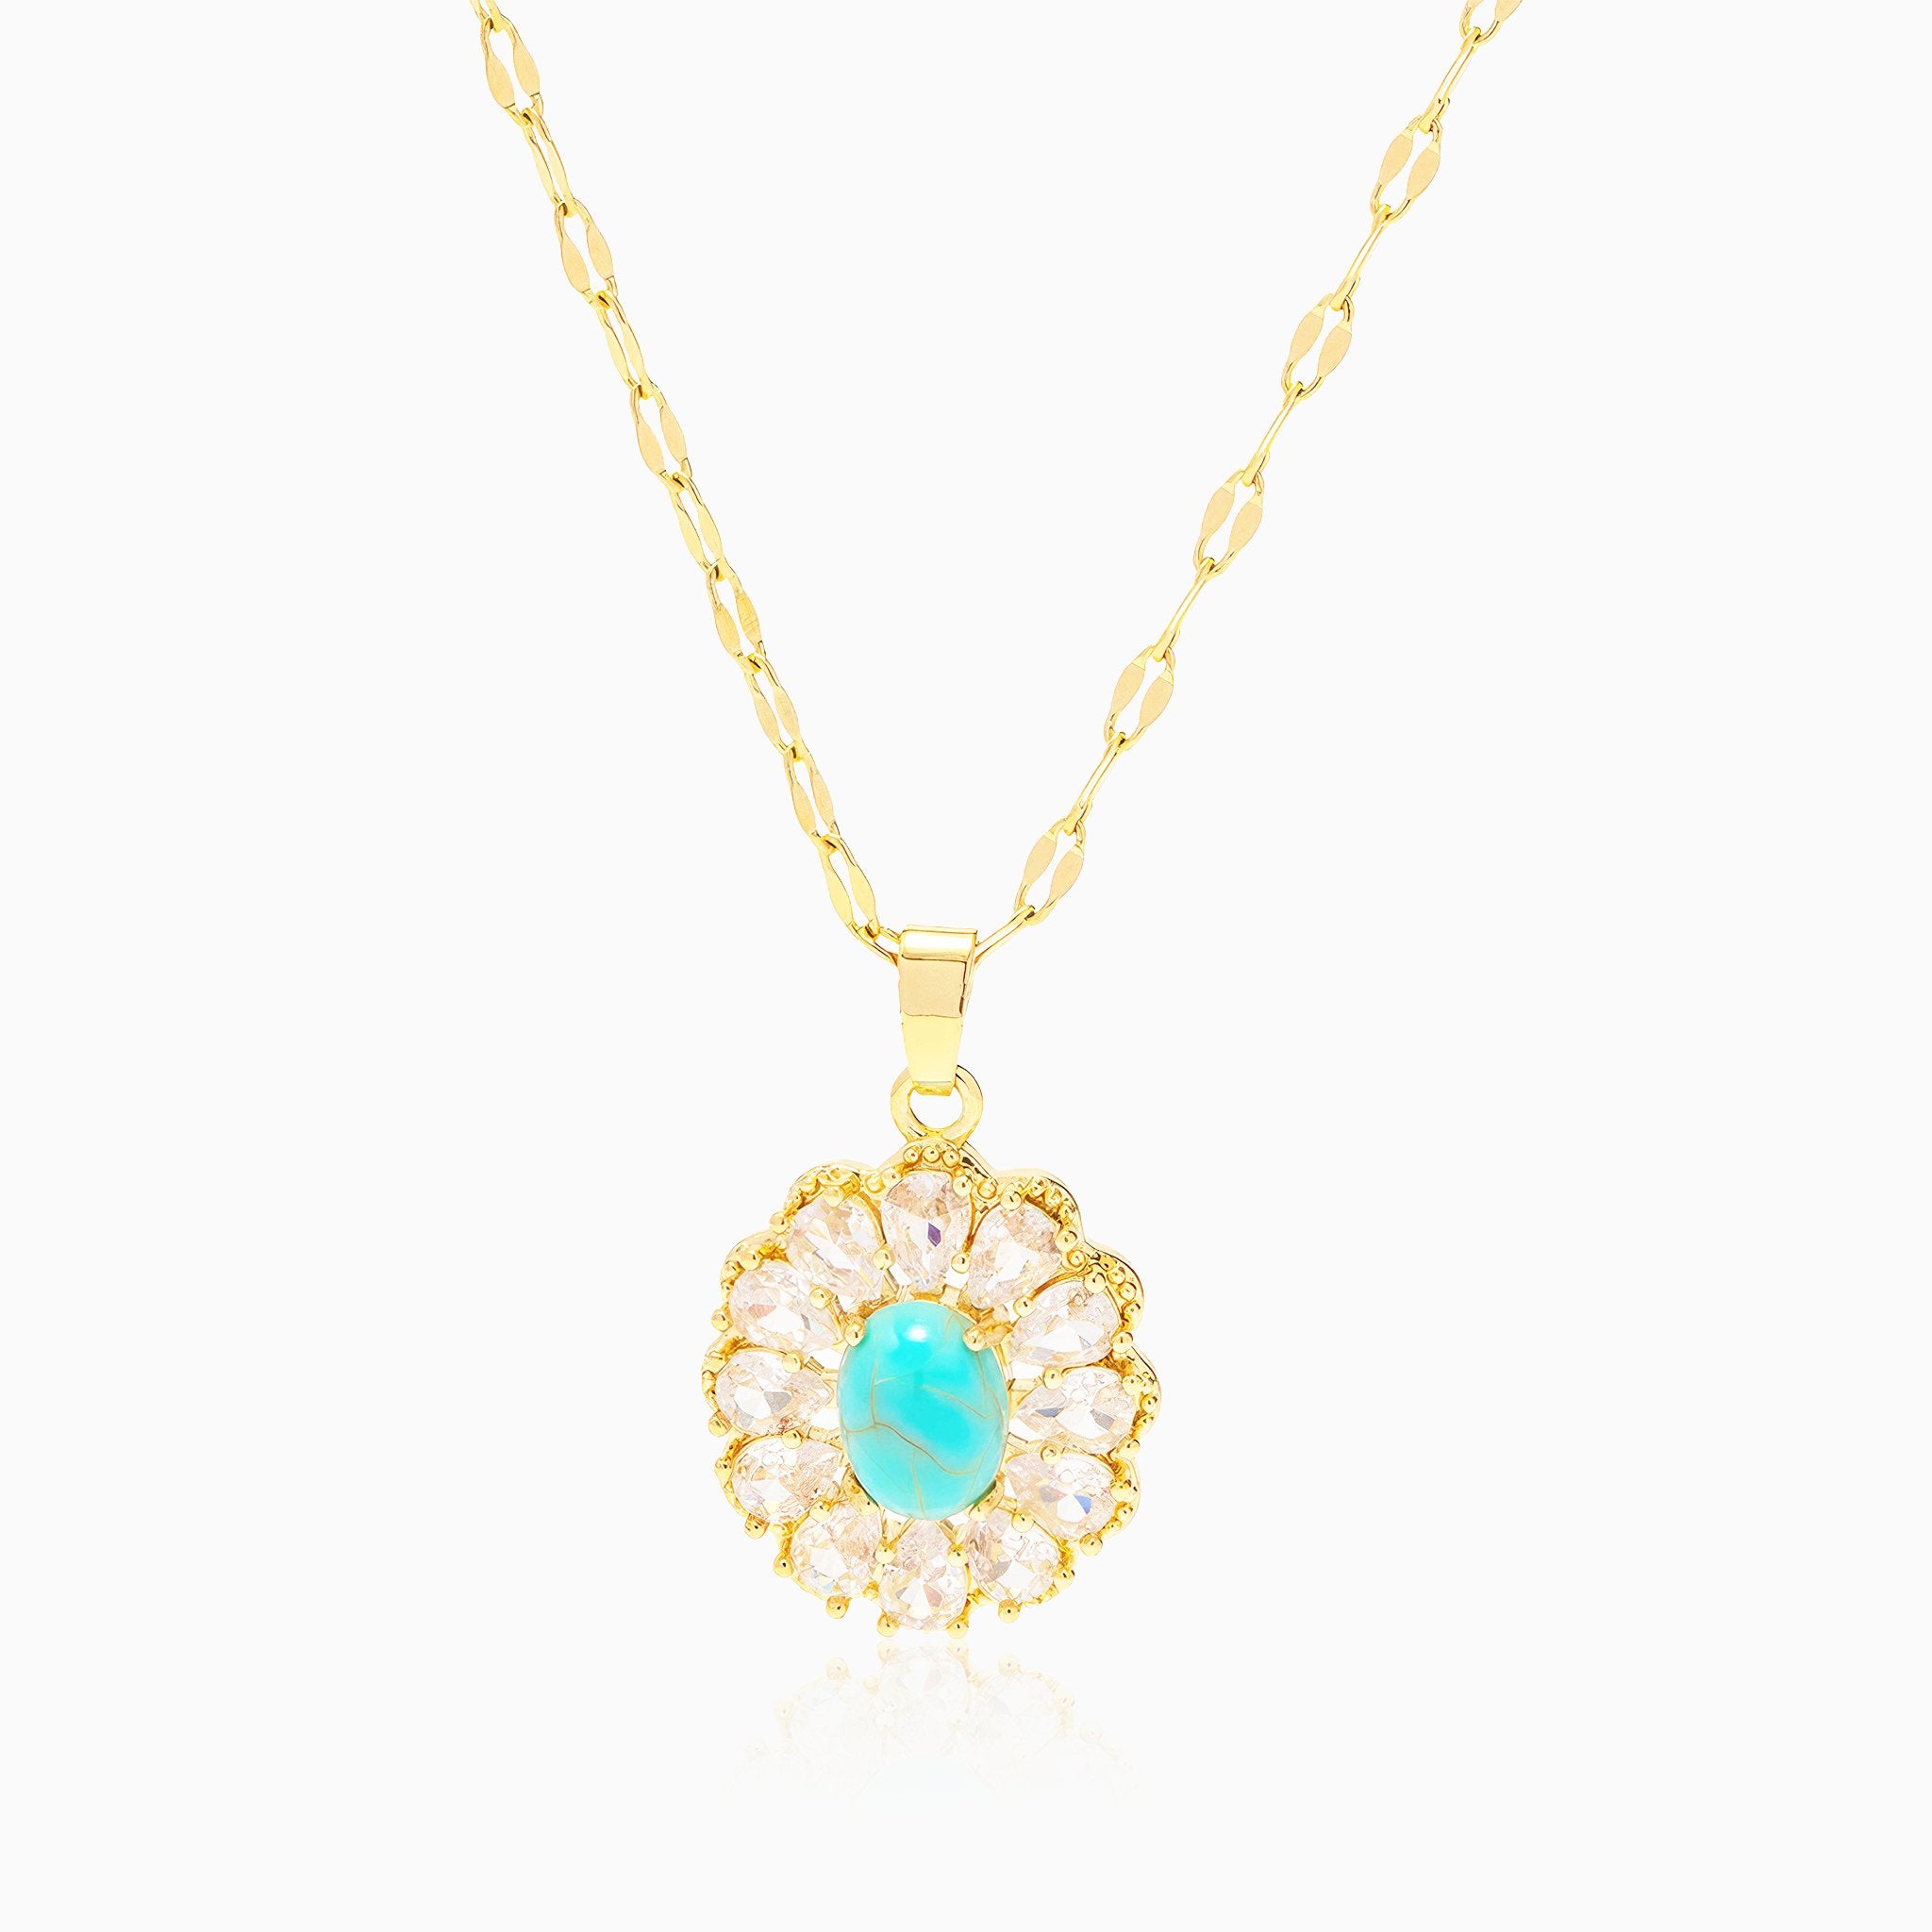 Sun Disc Necklace with Dazzling White Gemstones - Nobbier - Necklace - 18K Gold And Titanium PVD Coated Jewelry